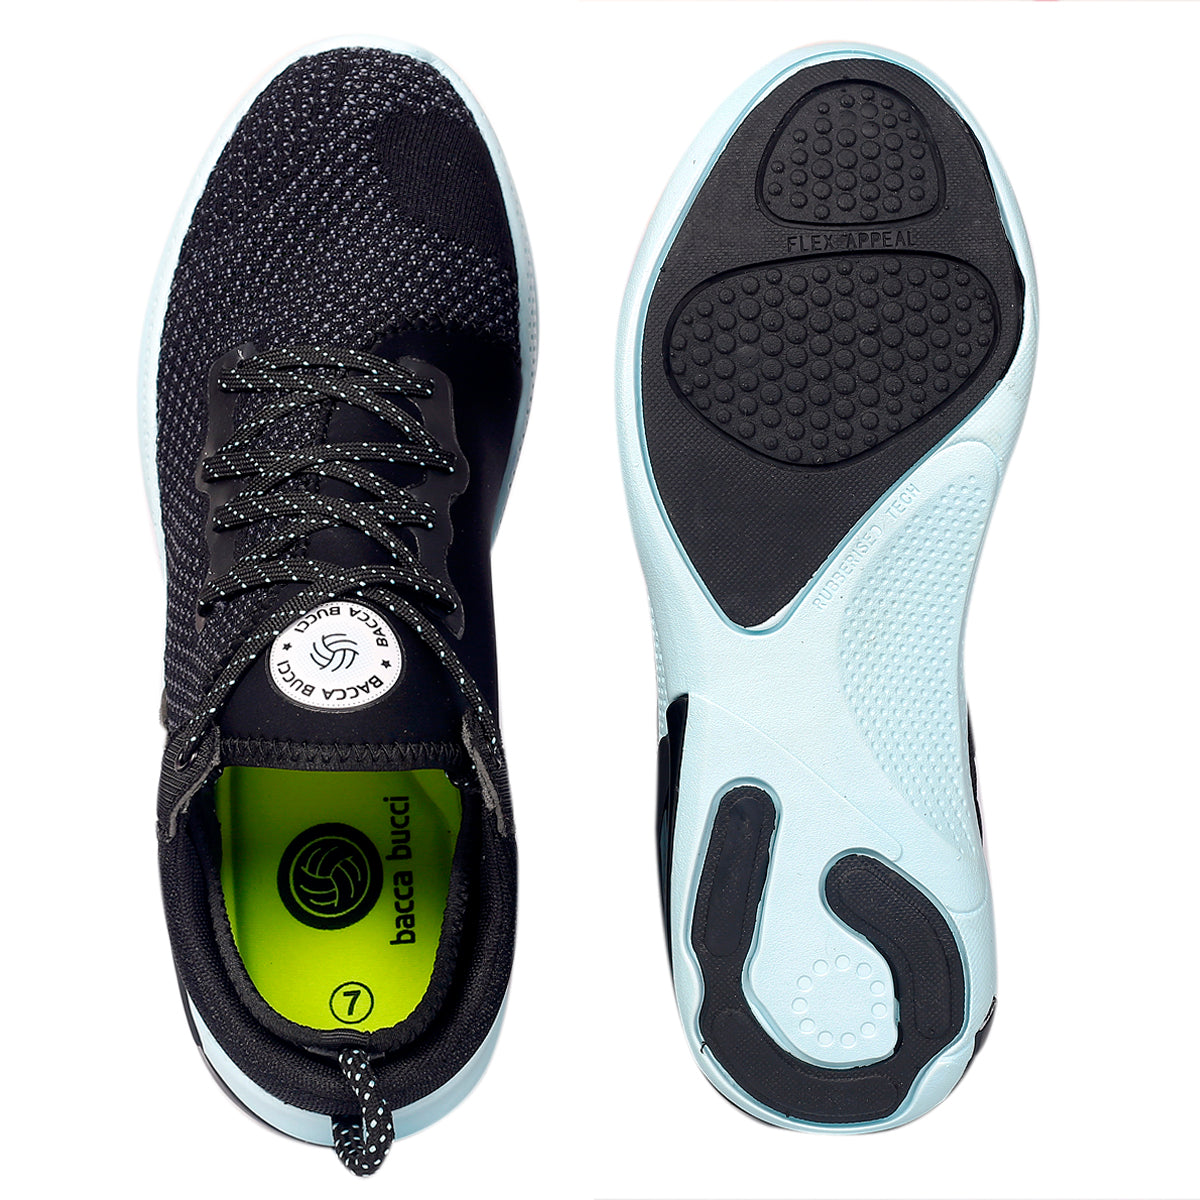 Bacca Bucci SPRINT Running Shoe with Smart Adaptive 5 in 1 Cushioning